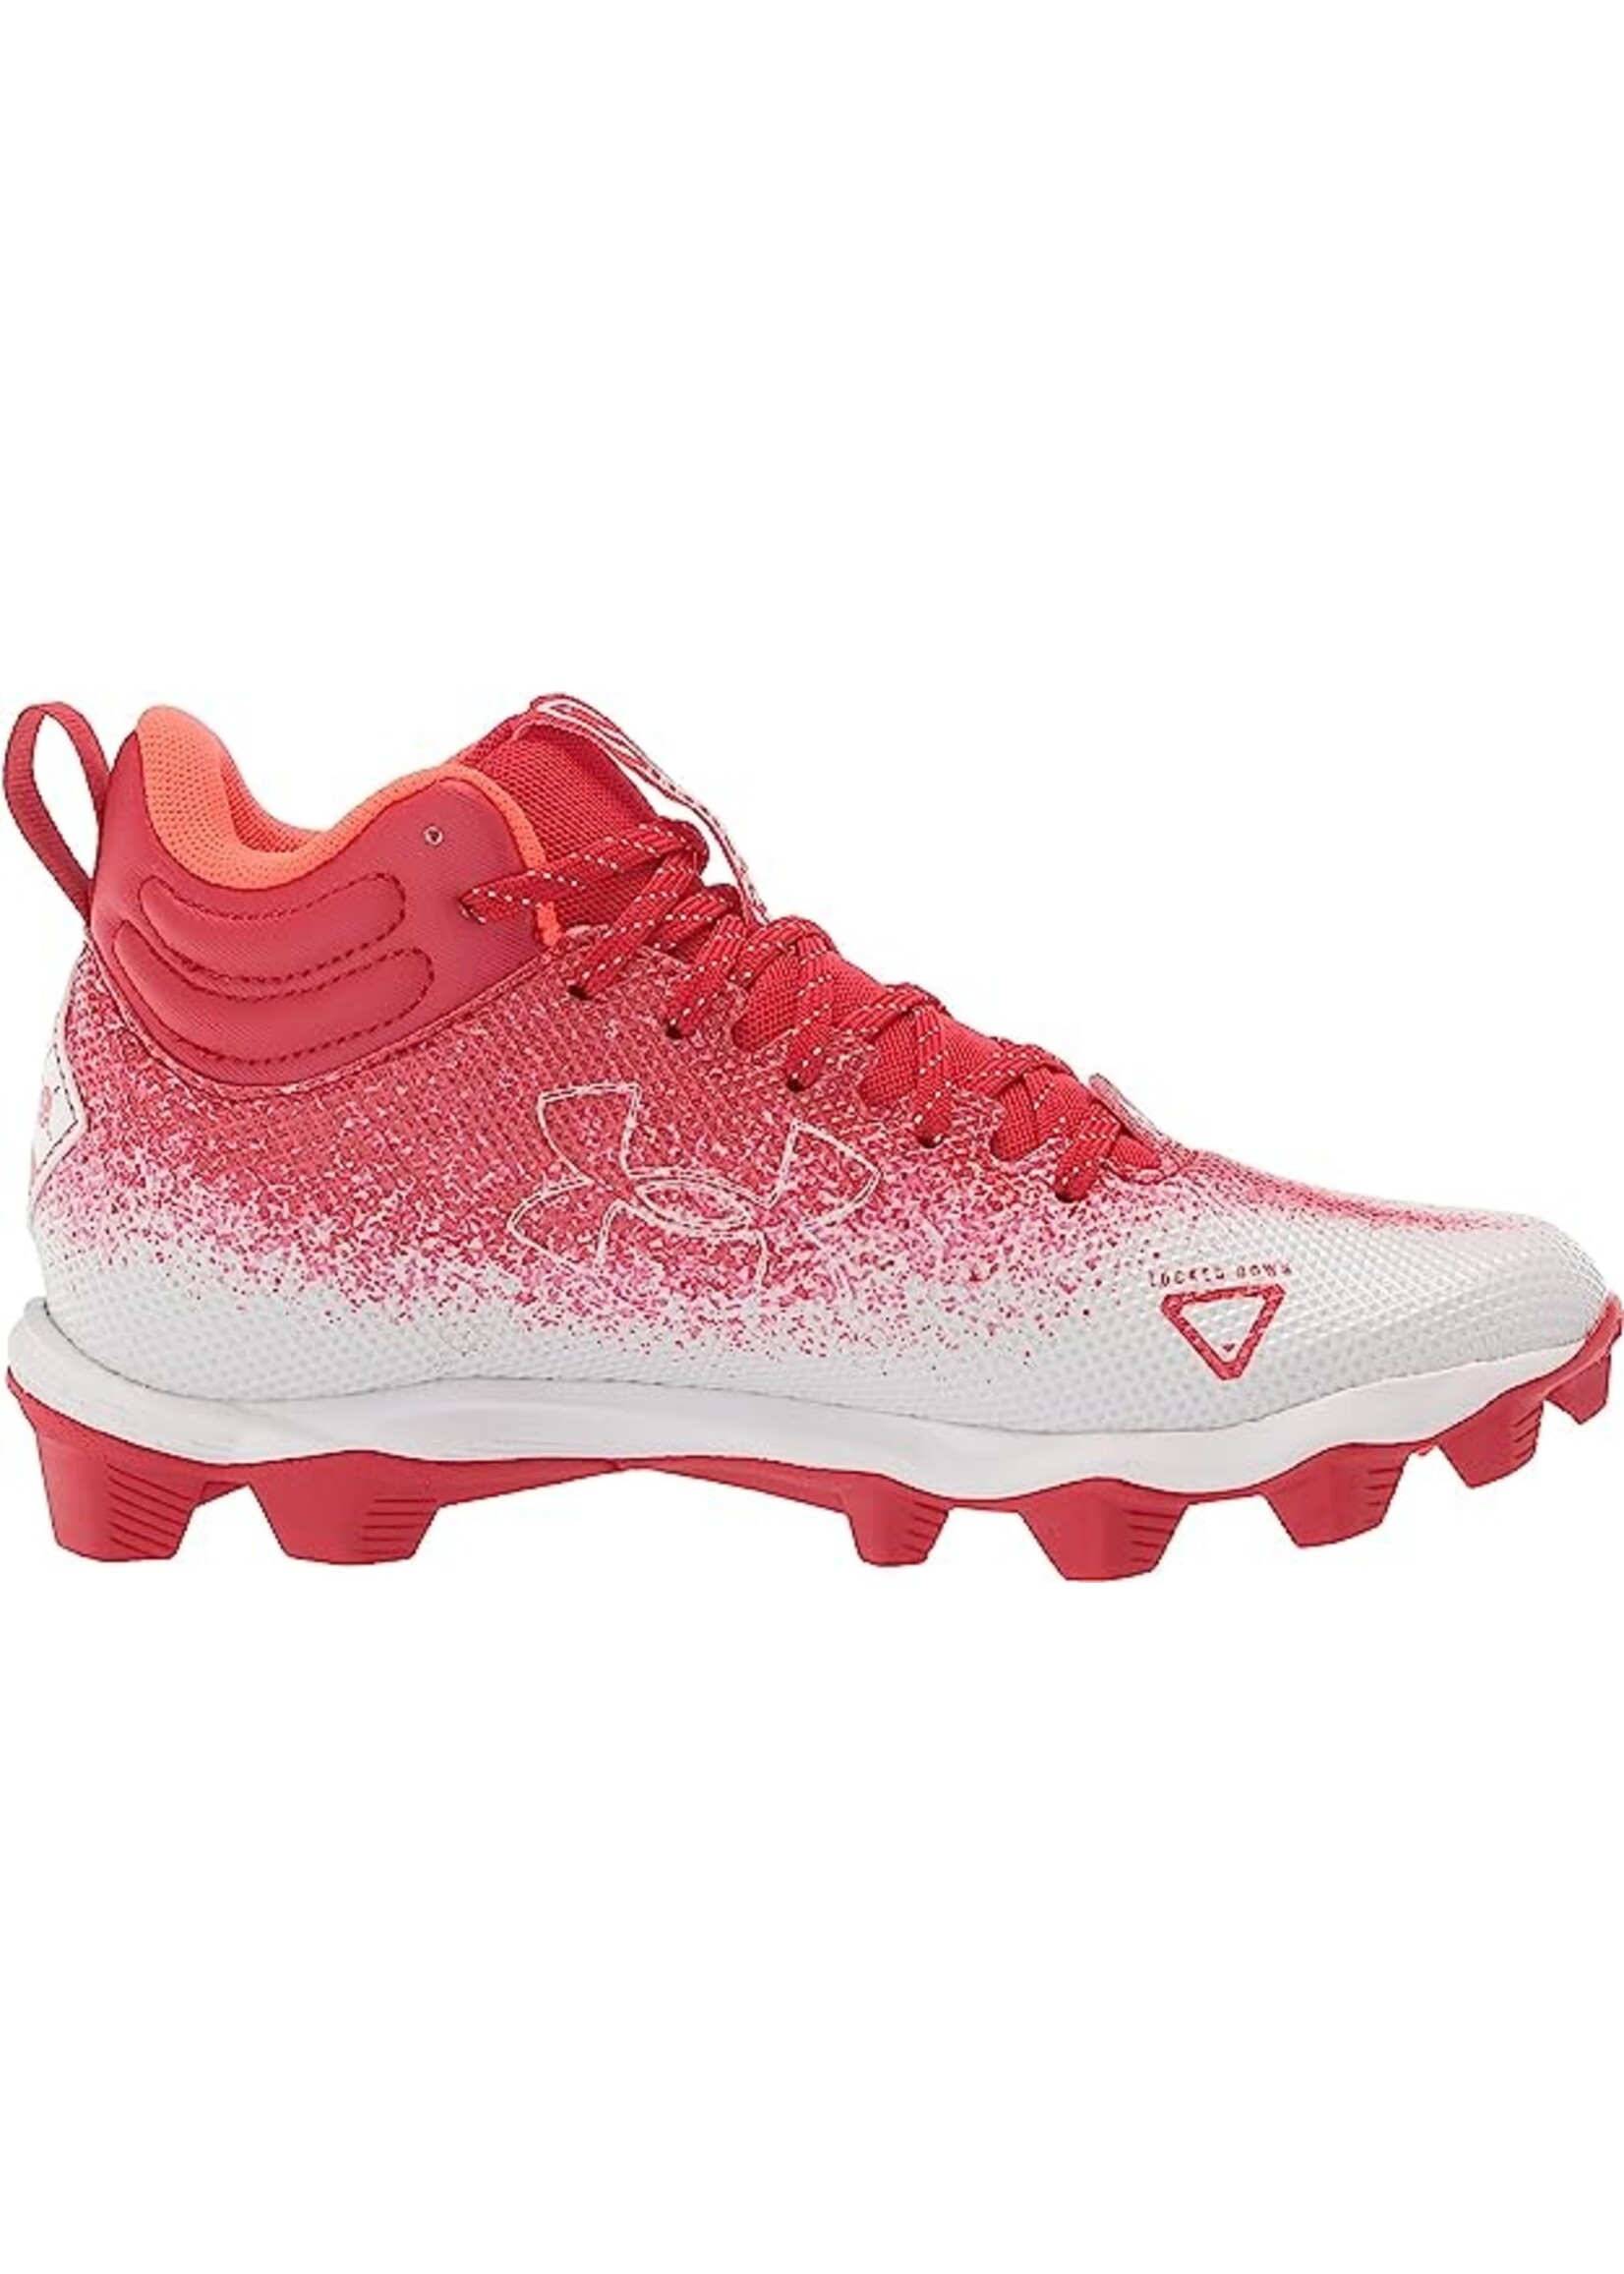 Under Armour UNDER ARMOUR CRAMPONS FOOTBALL SPOTLIGHT FRANCHISE RM 2.0 JR ROUGE